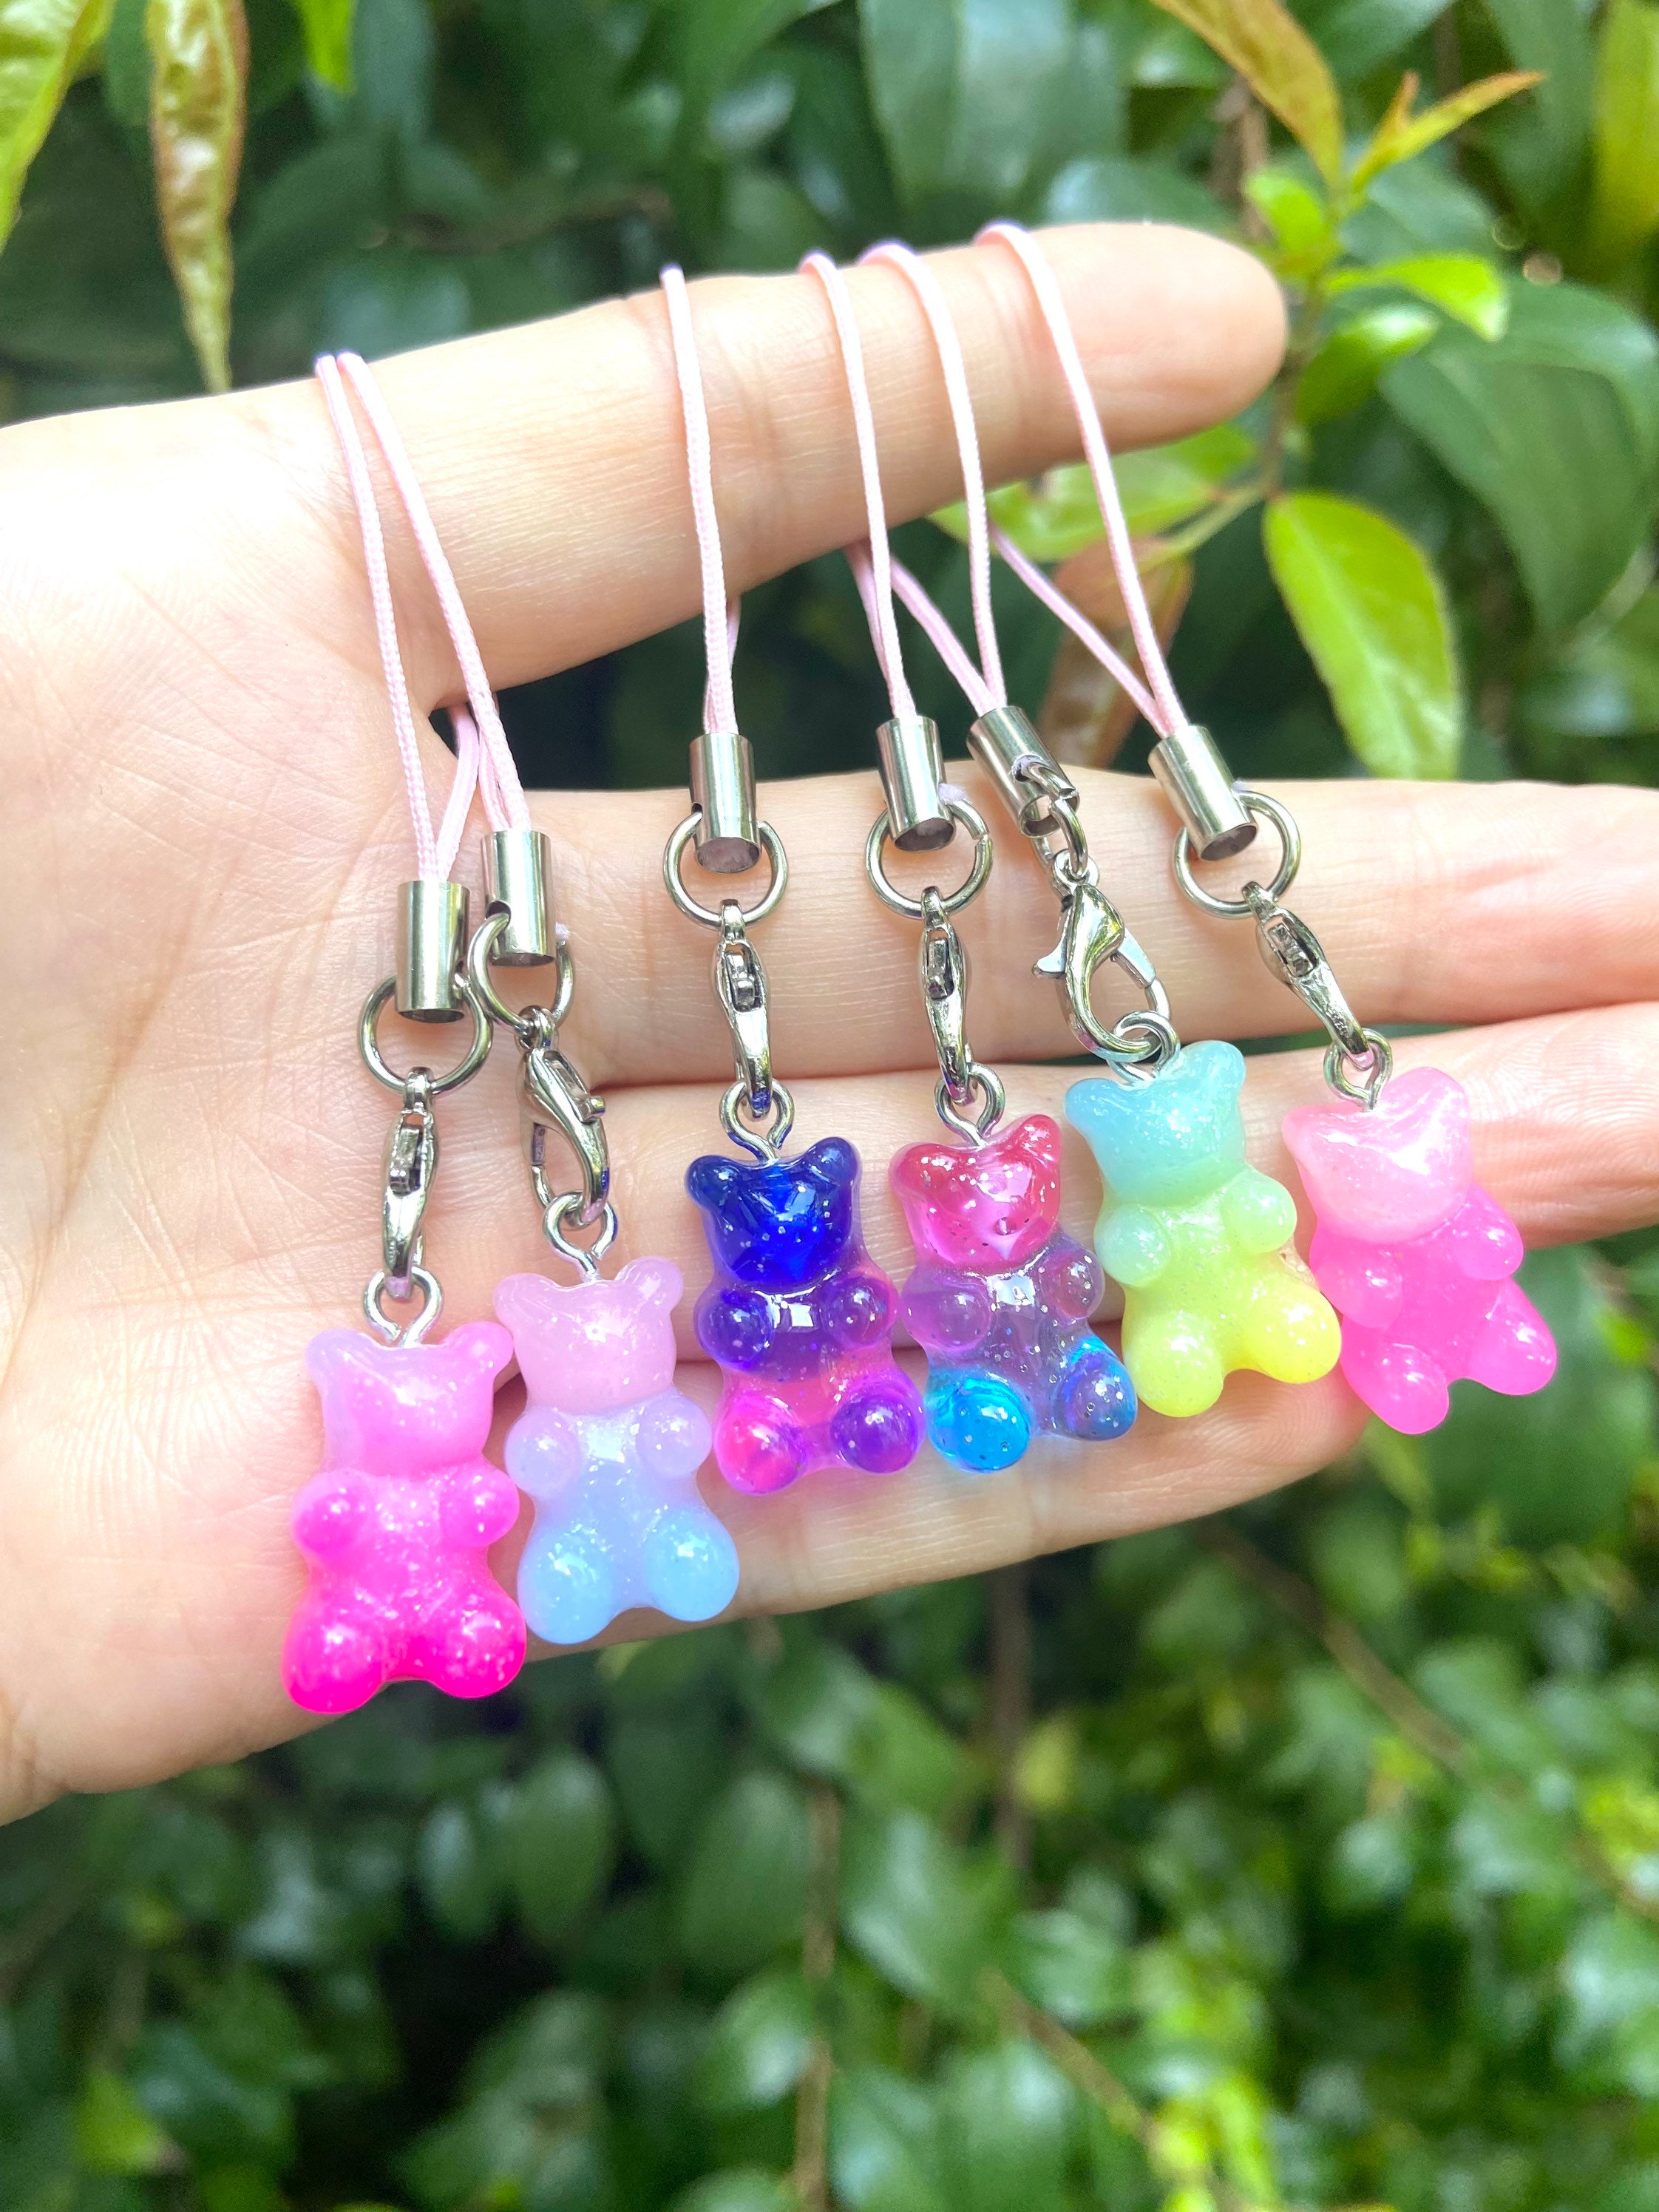 Gummy Bear 3D Resin Candy Croc Charms Handmade Ombre and Solid Clear 6pcs  BEST PRICE 5.99 and FREE Charm 